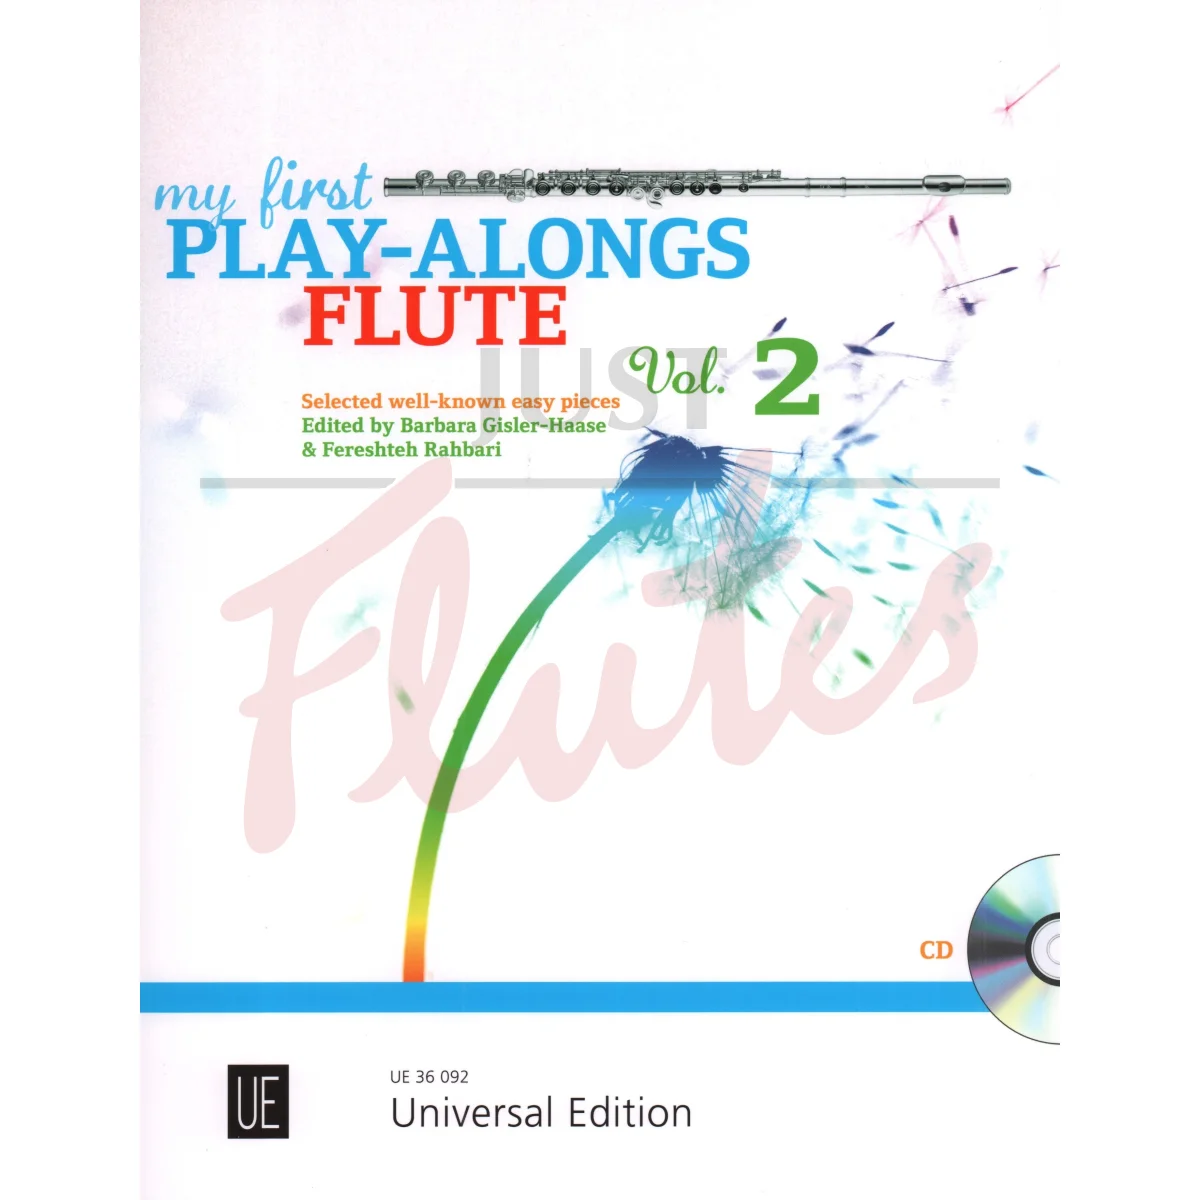 My First Play-Alongs Flute Vol.2